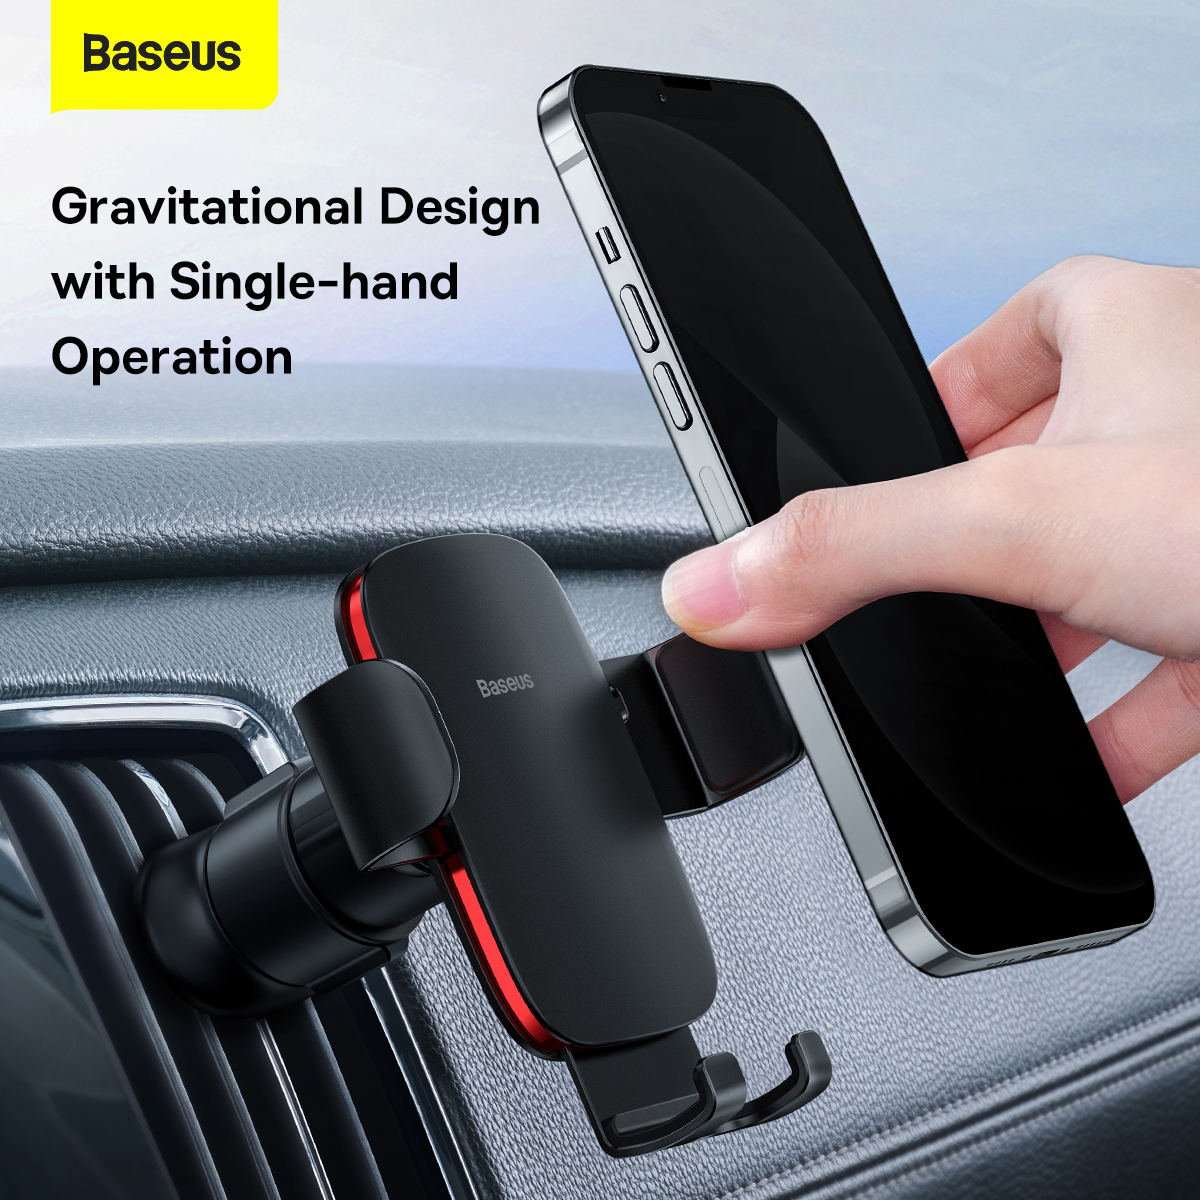 Baseus-Metal-Age-II-New-Gravity-Car-Mount-Phone-Holder-Shockproof-Air-Outlet-Stand-for-47-67-inch-Ph-1932910-2